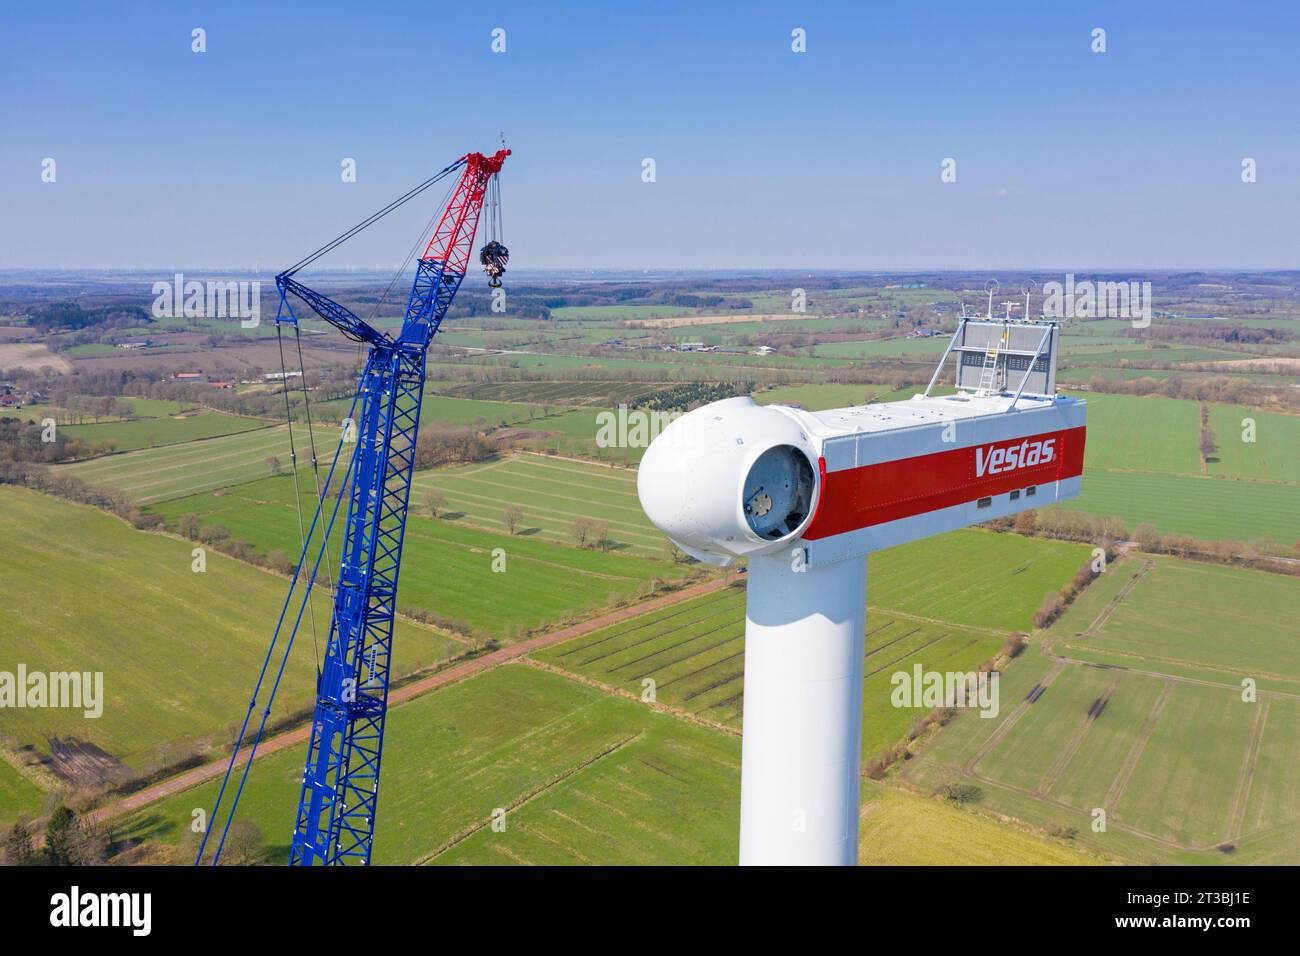 Construction crane assembling wind turbine at windfarm showing mounted nacelle with rotor hub Stock Photo